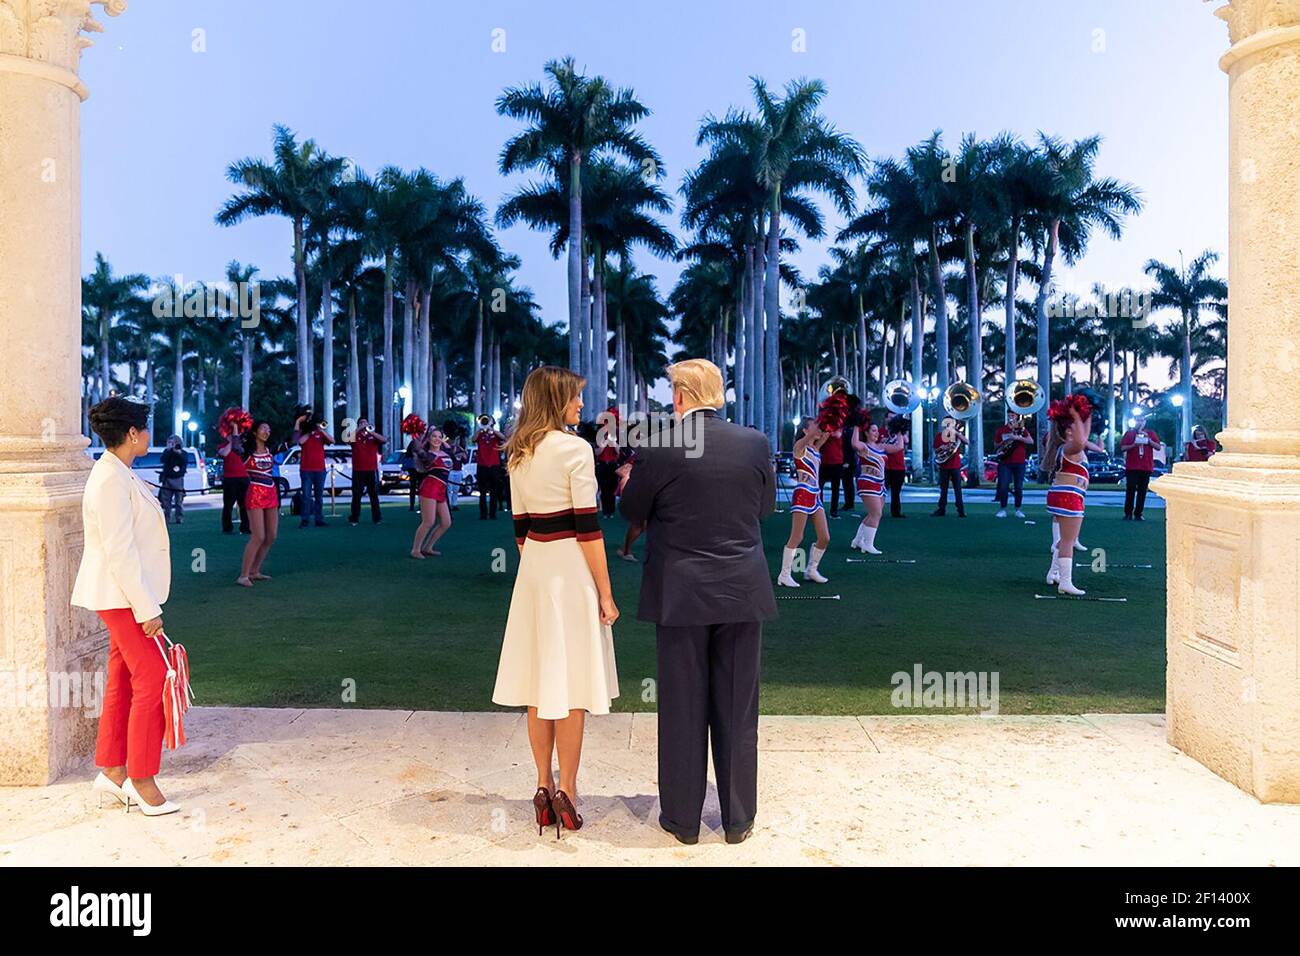 President Donald Trump and First Lady Melania Trump are entertained by members of the Florida Atlantic University marching band Sunday evening Feb. 2 2020 outside the Trump International Golf Club in West Palm Beach Fla. prior to attending a Super Bowl party. Stock Photo